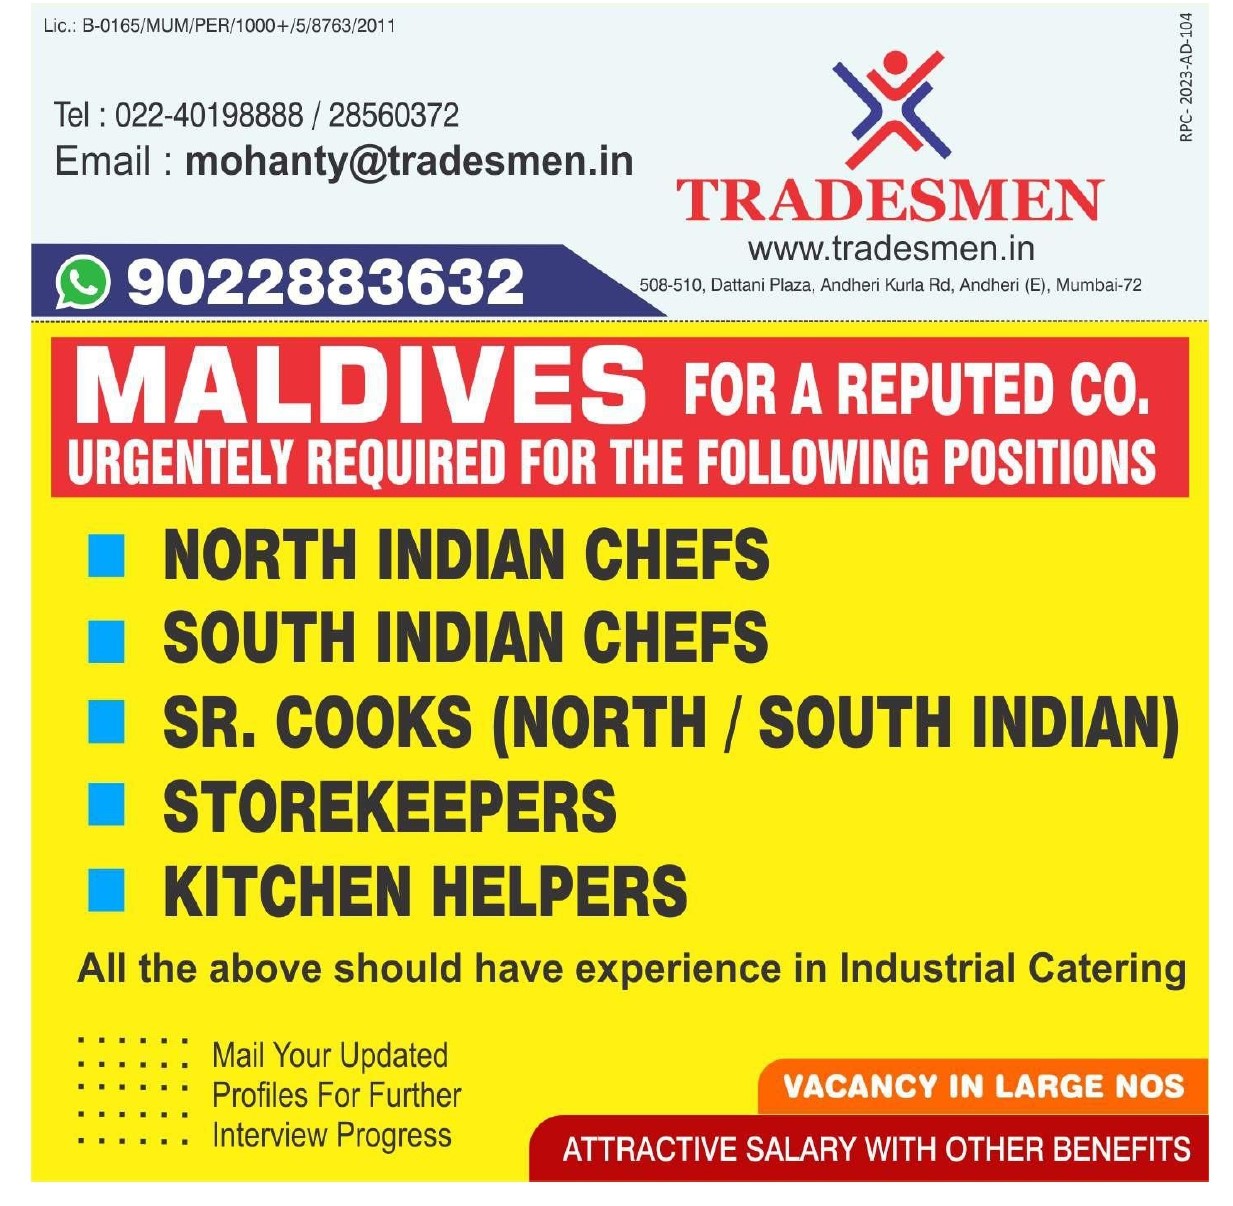 Hiring for Reputed Co. Maldives